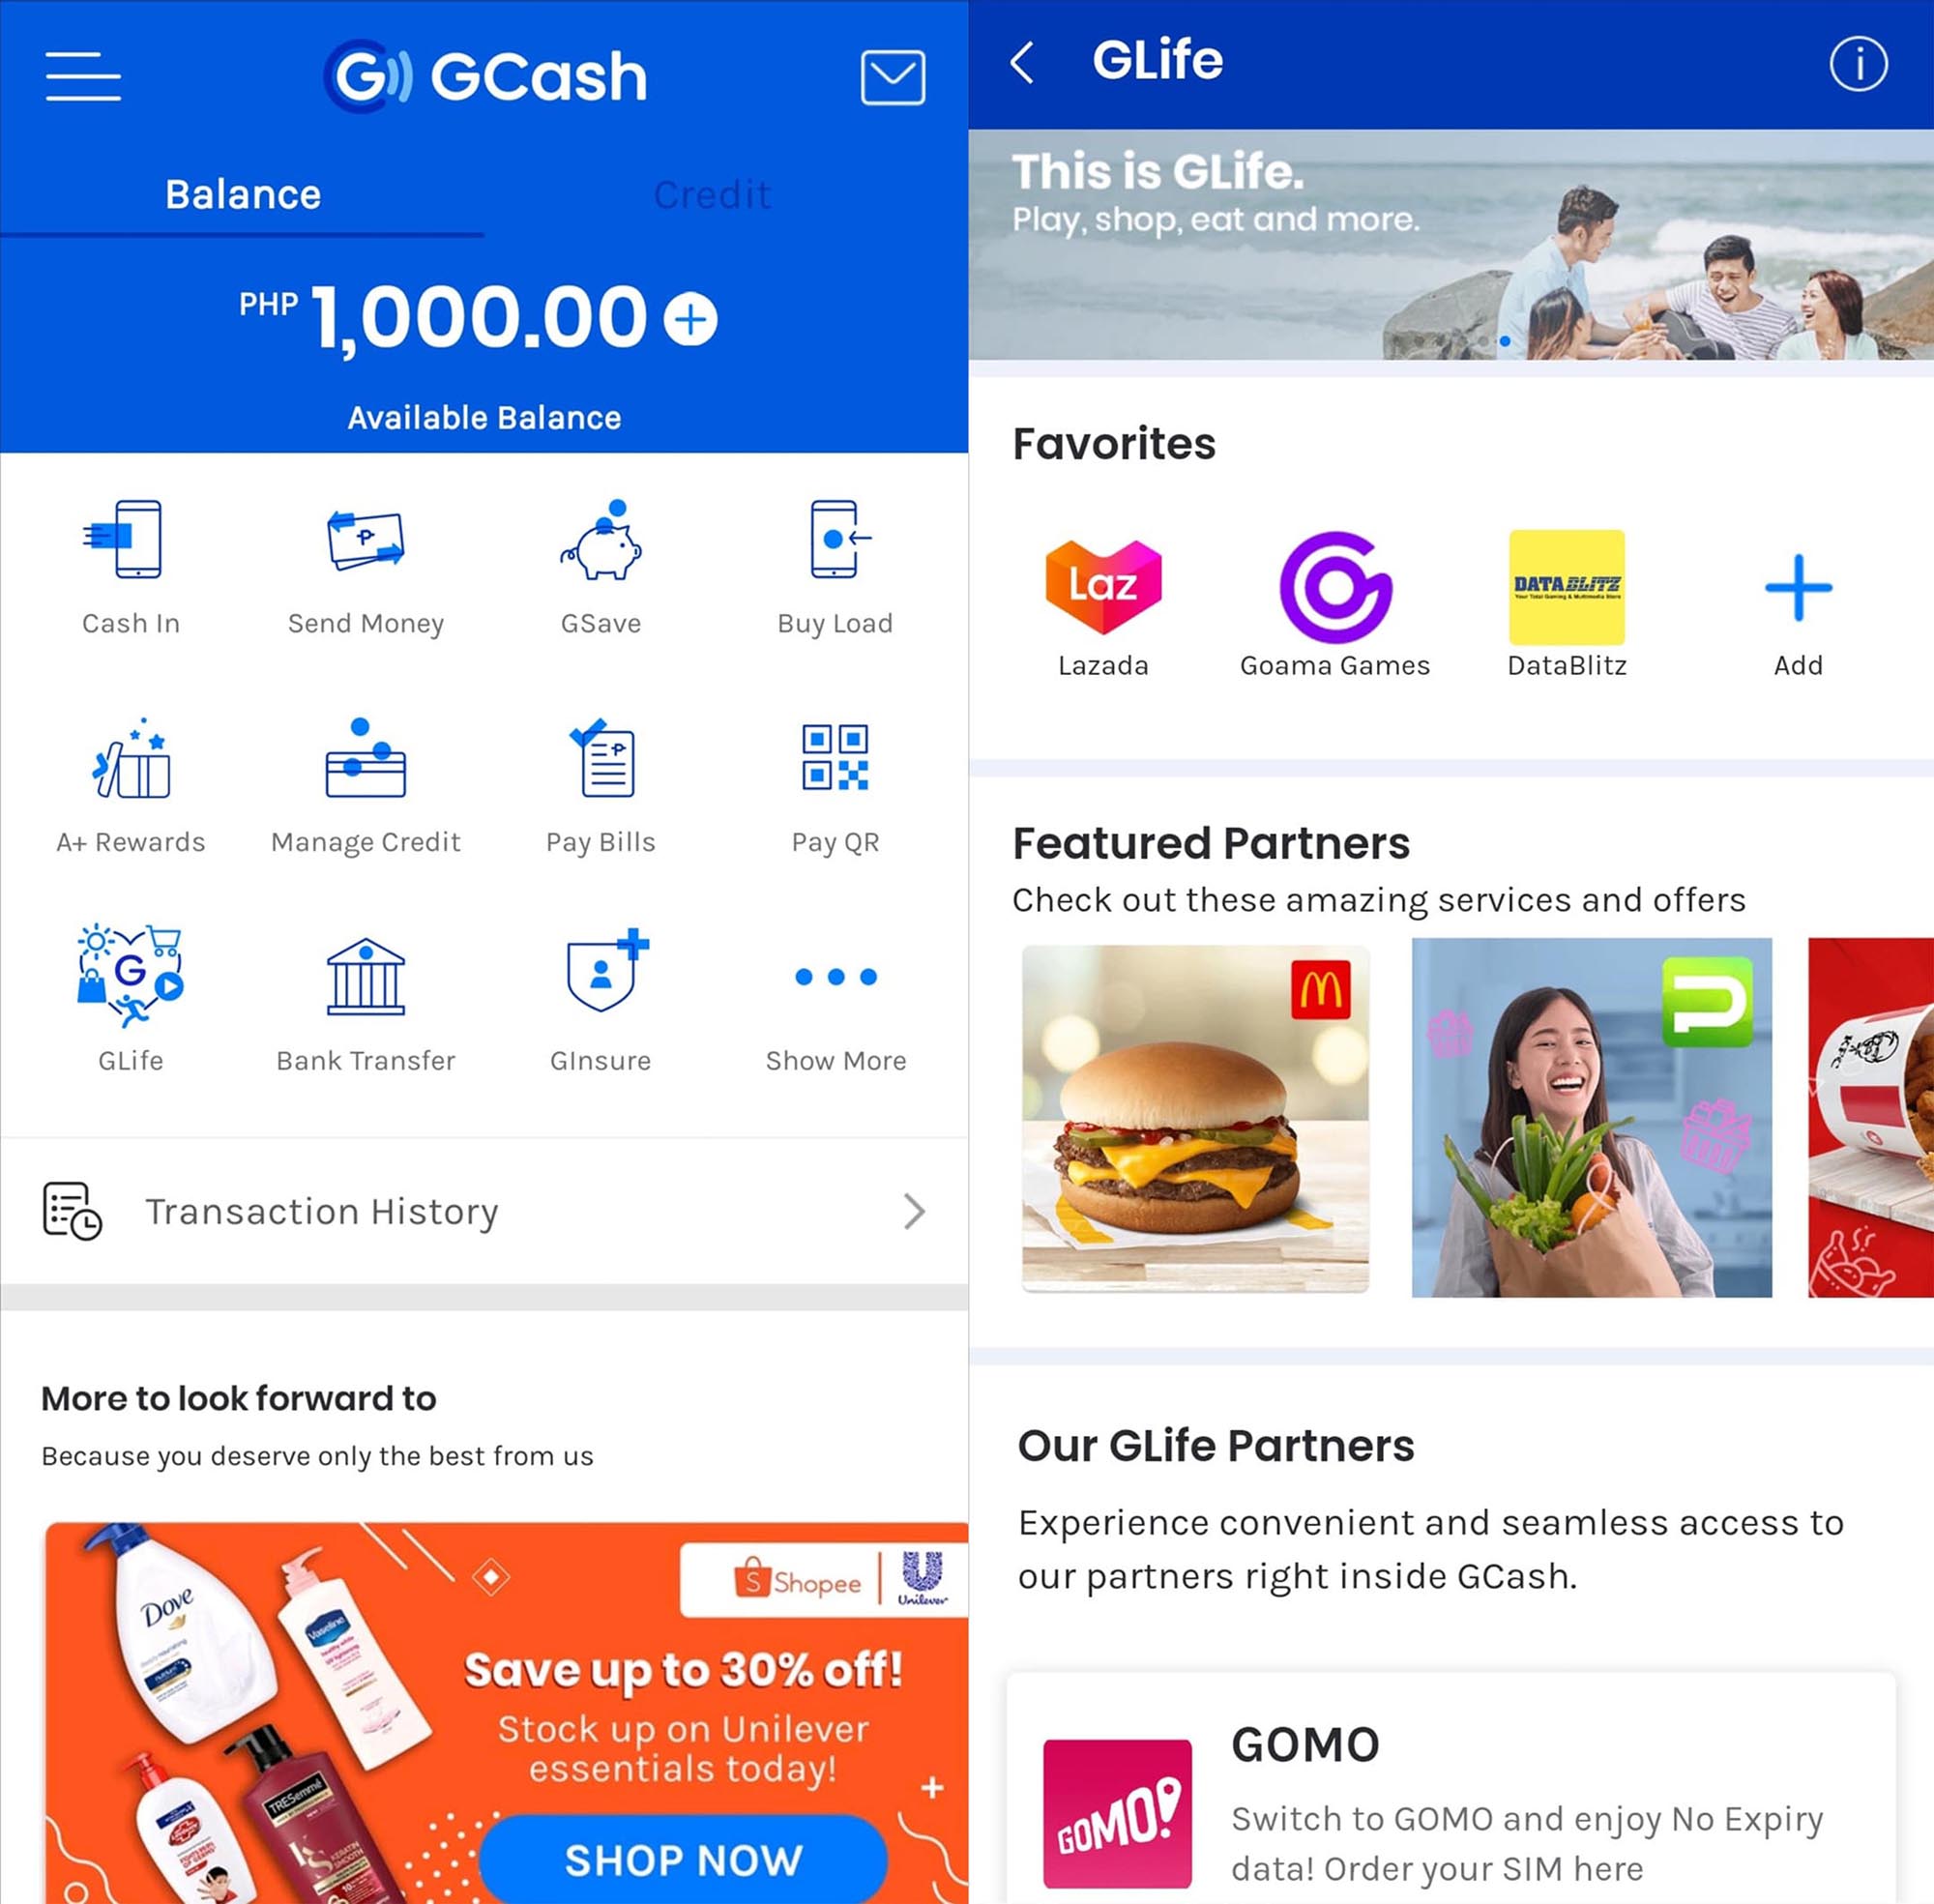 Stay safe at home with GCash! Your new super life app that keeps you connected, even with essentials